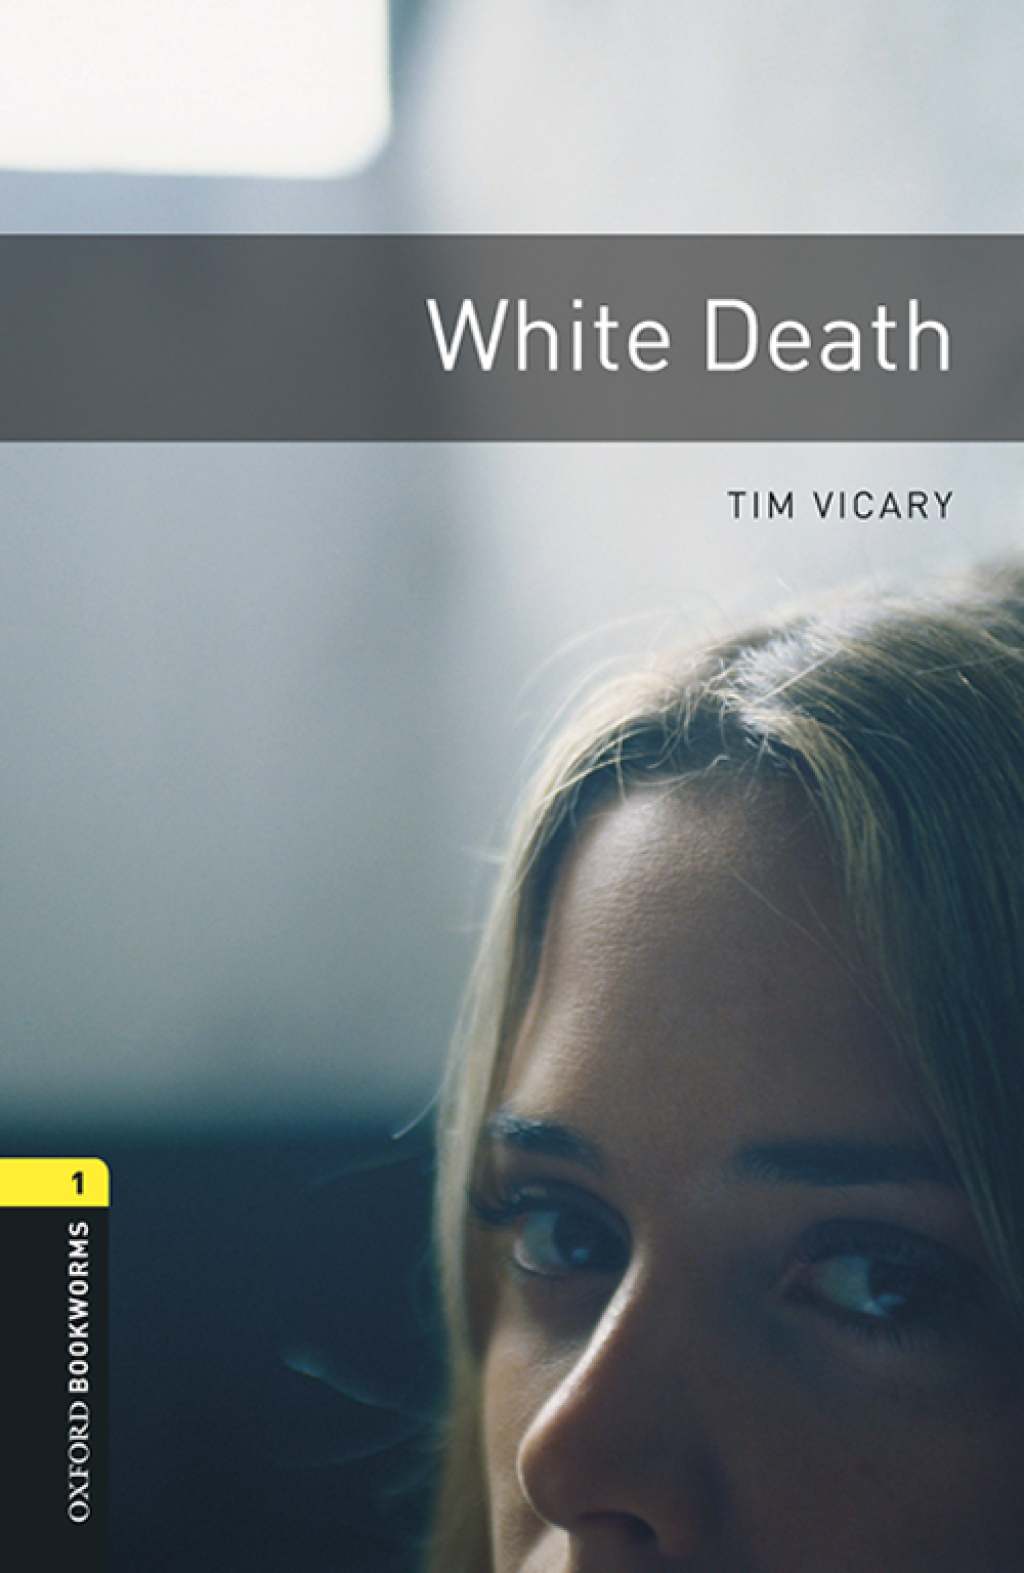 White Death Level 1 Oxford Bookworms Library - 3rd Edition (eBook Rental)